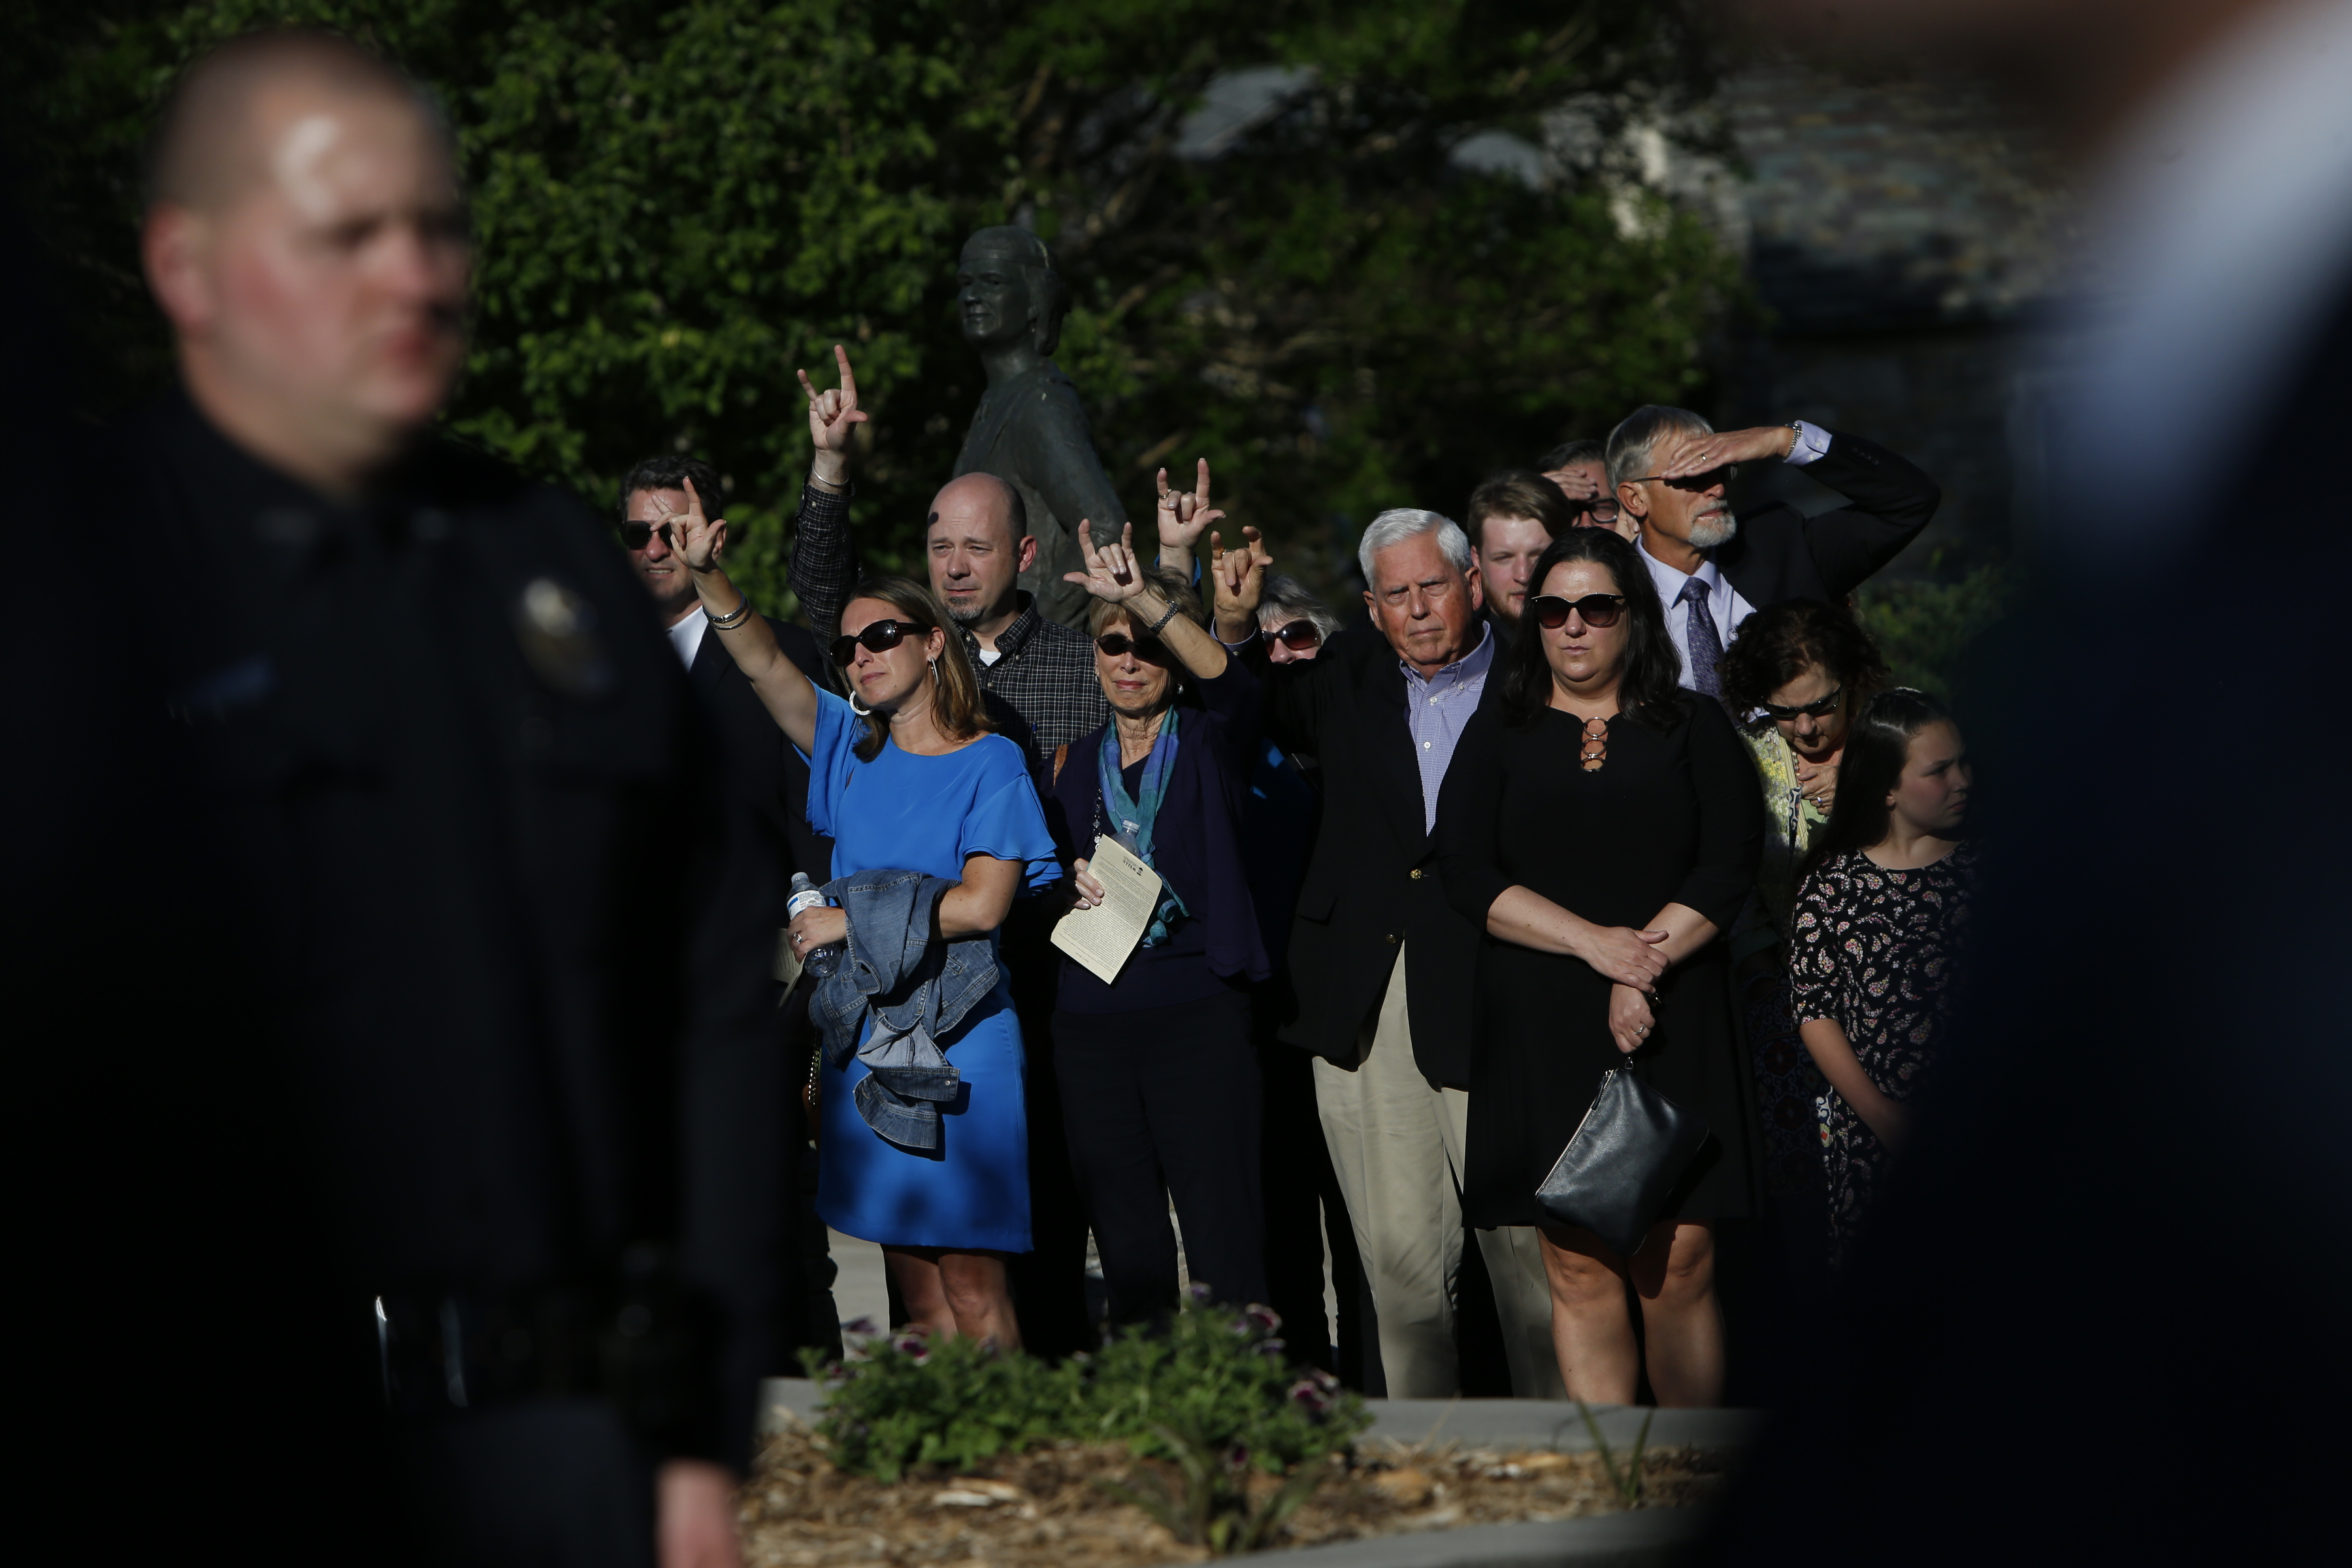 Mourners sign "I love you" as the casket carrying UNC Charlotte student Riley Howell is taken to a waiting hearse from his celebration of life service on May 5, 2019 in Waynesville, North Carolina. (Brian Blanco—Getty Images))